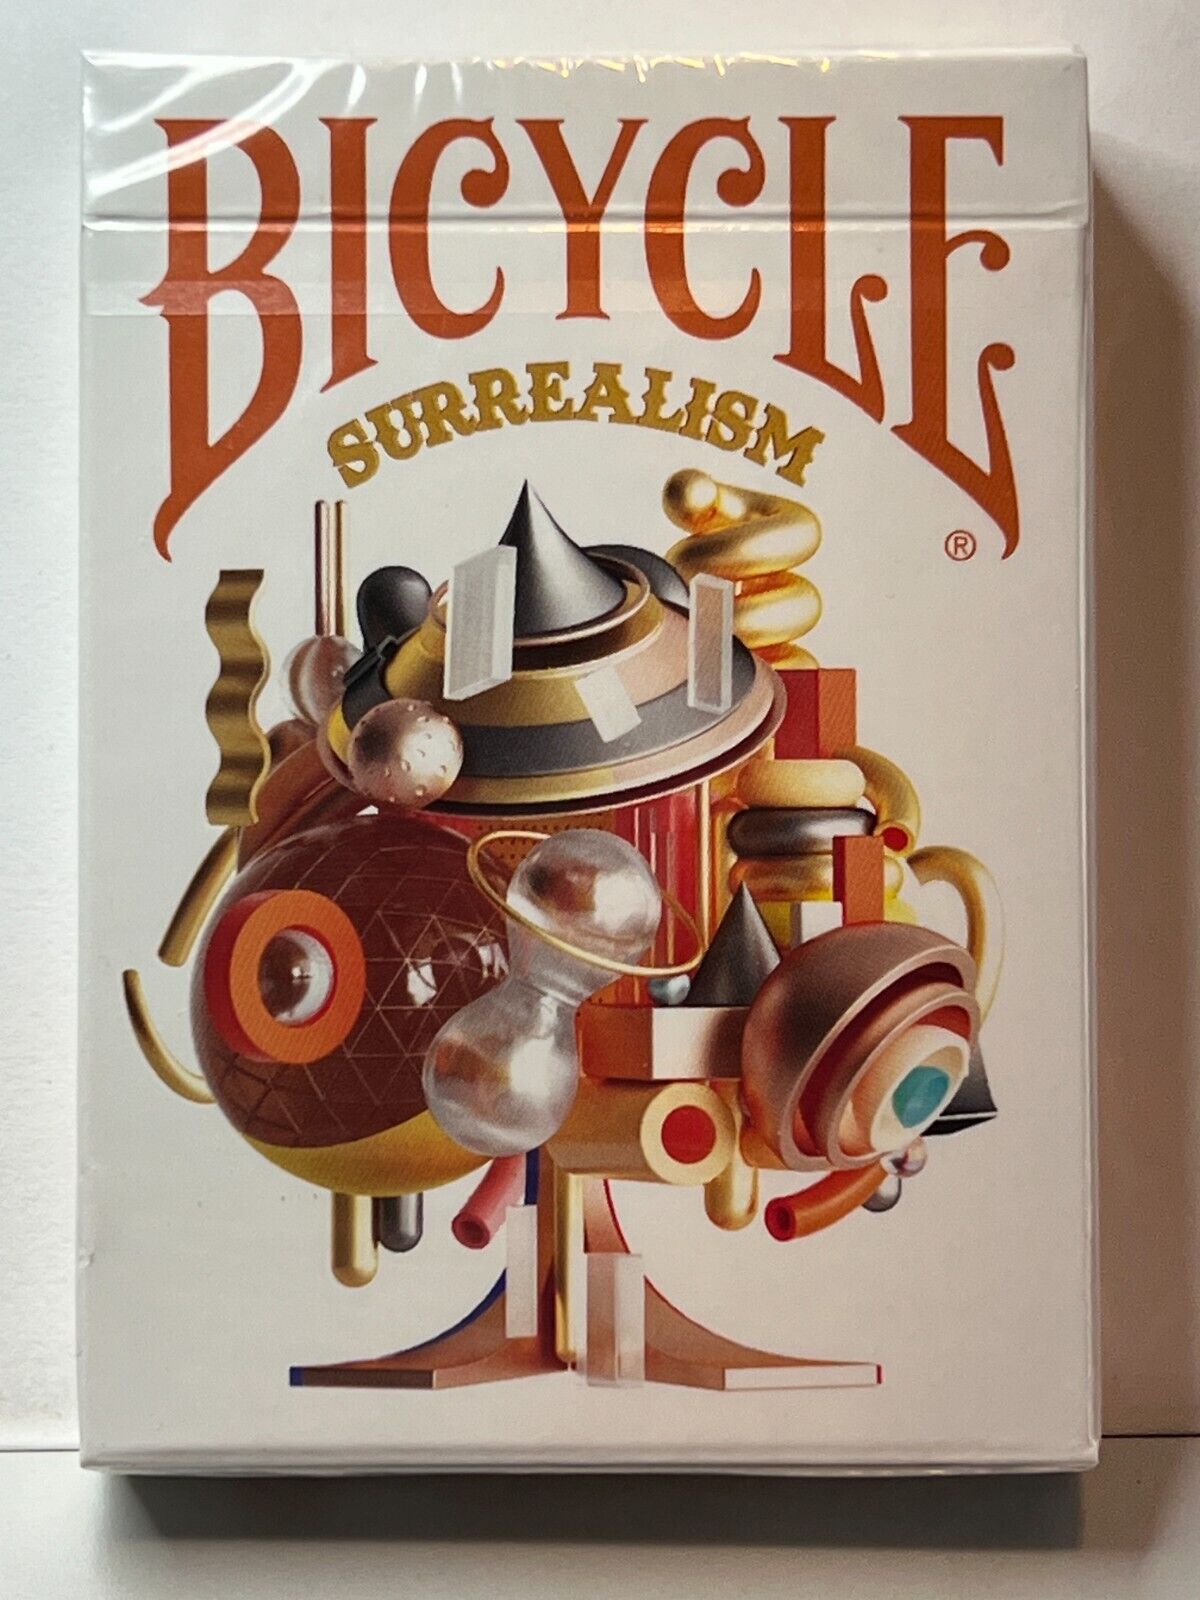 Surrealism [Bicycle] - Playing Cards